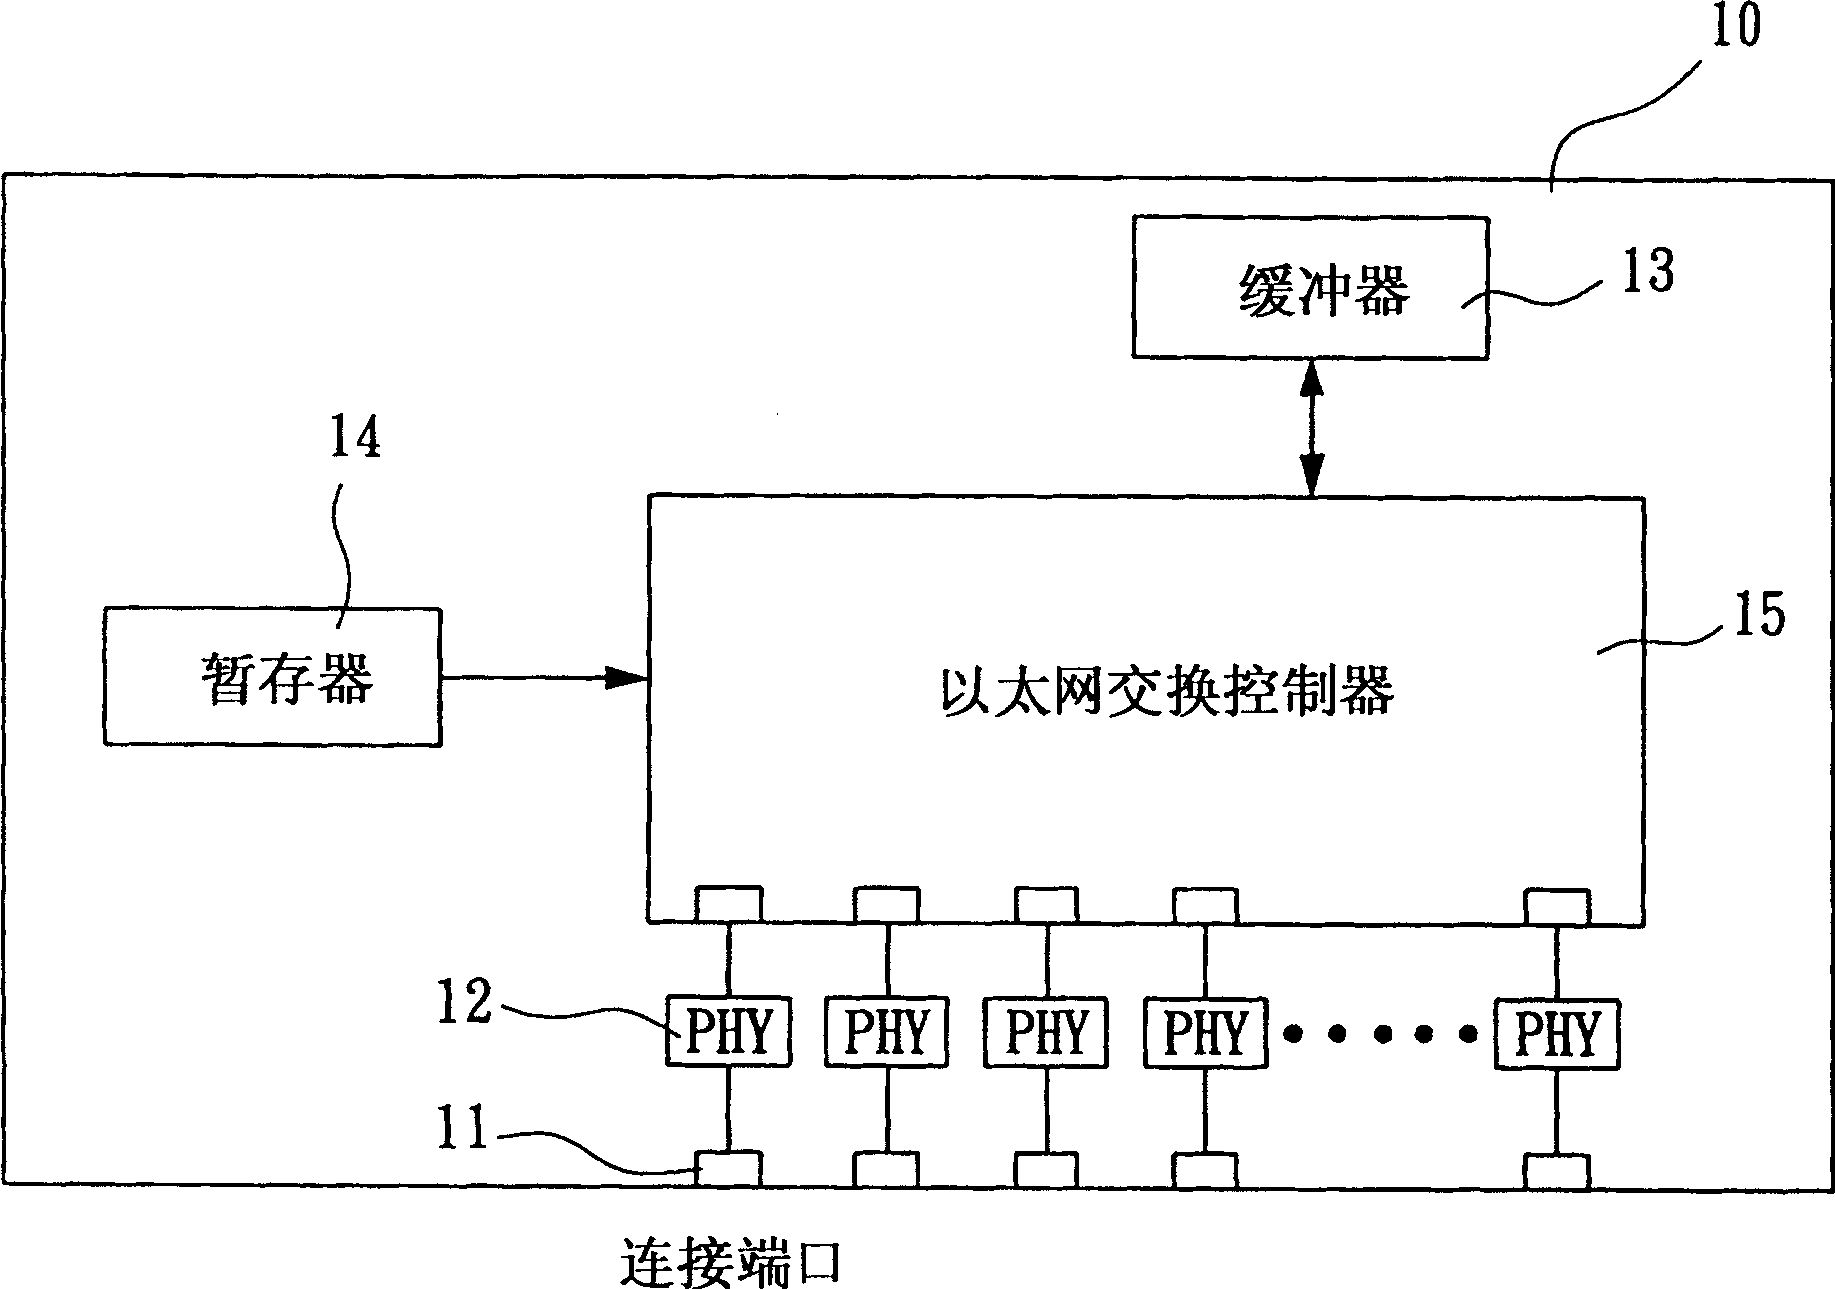 Ethernet exchange controller and its congestion control method